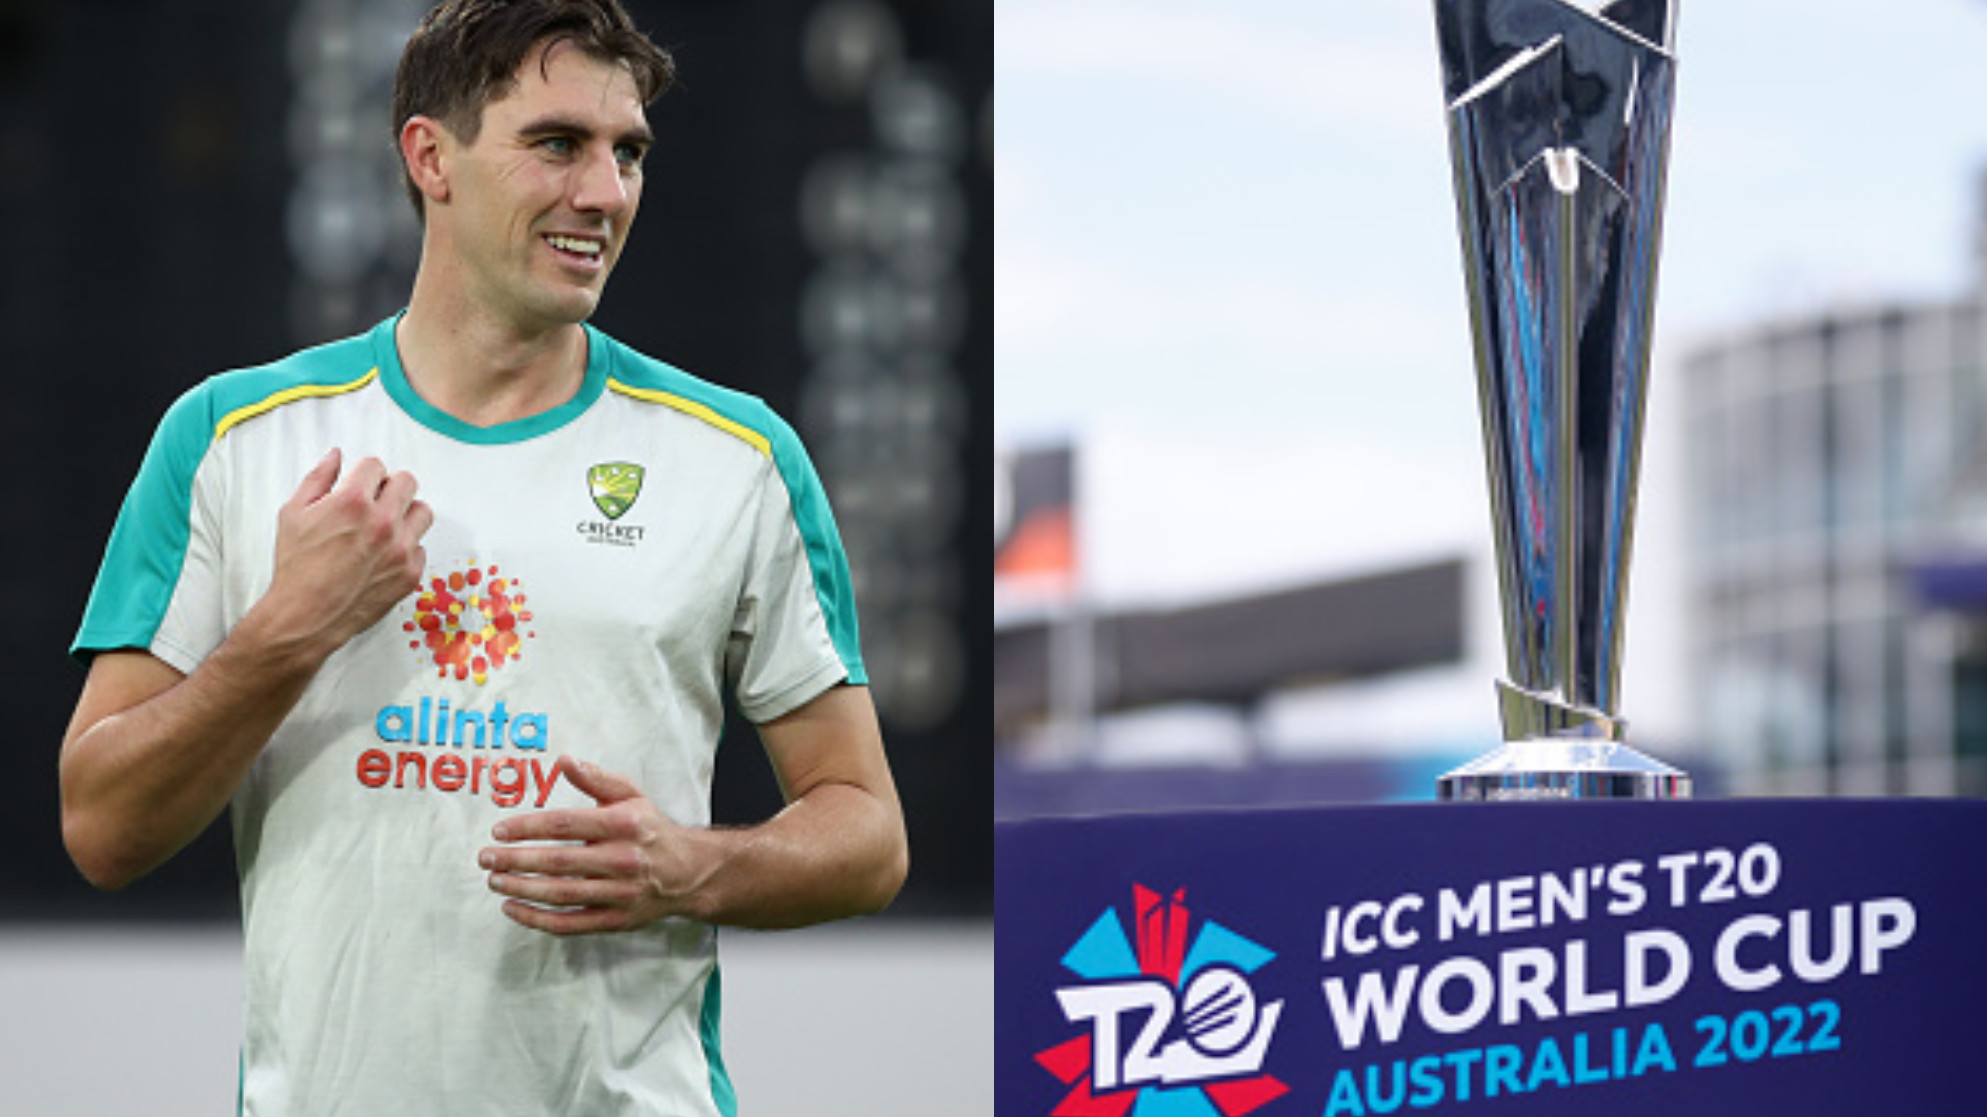 ICC allows teams to field COVID-19 positive players in T20 World Cup; Pat Cummins calls it ‘totally different dynamics’